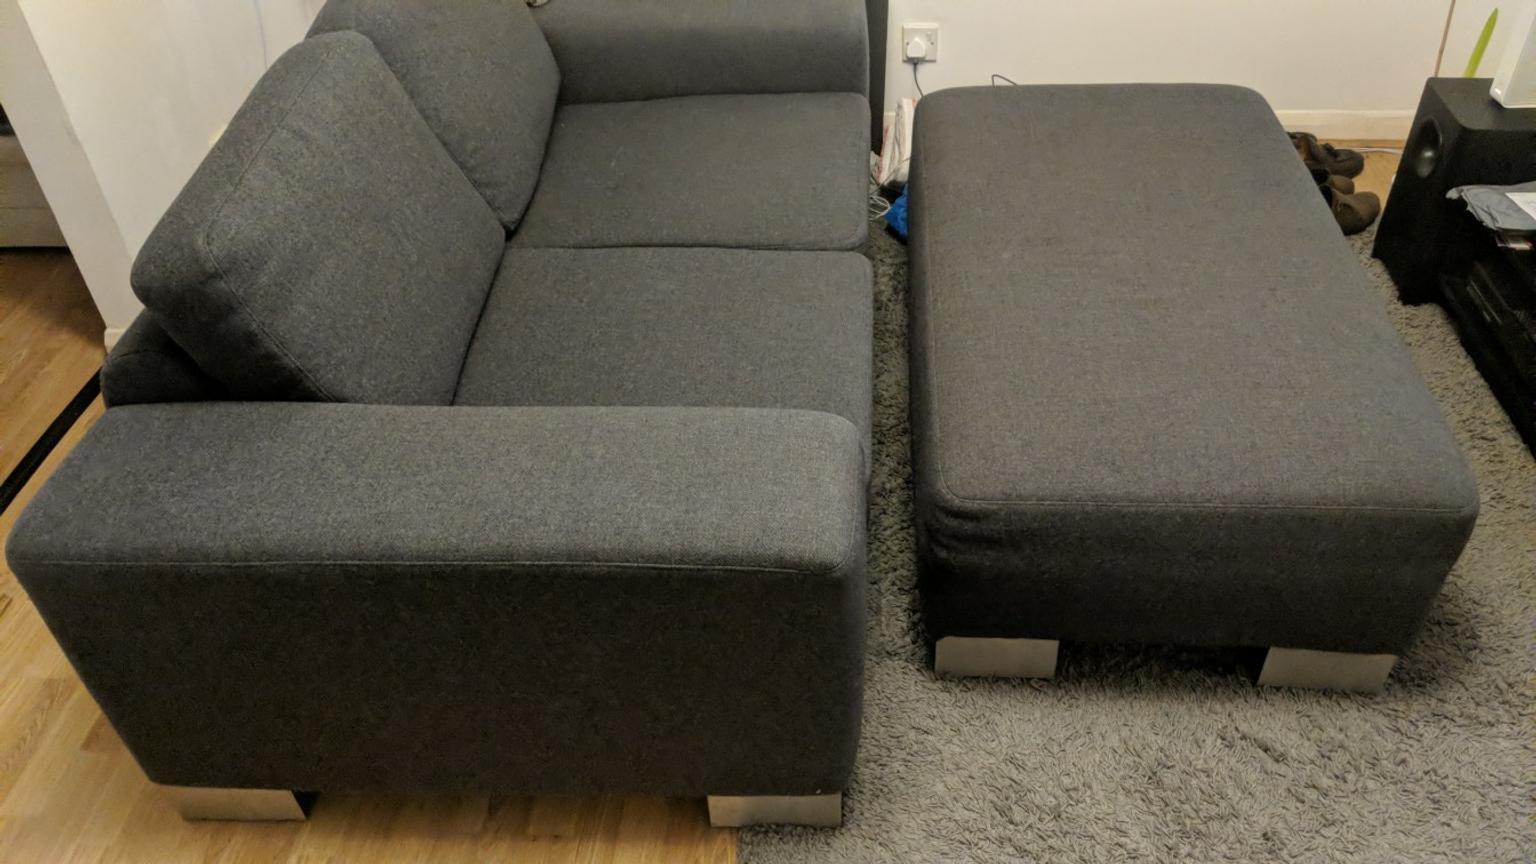 2 Seater Sofa And Foot Rest In Ig6, Furniture Sofa Leg Rest